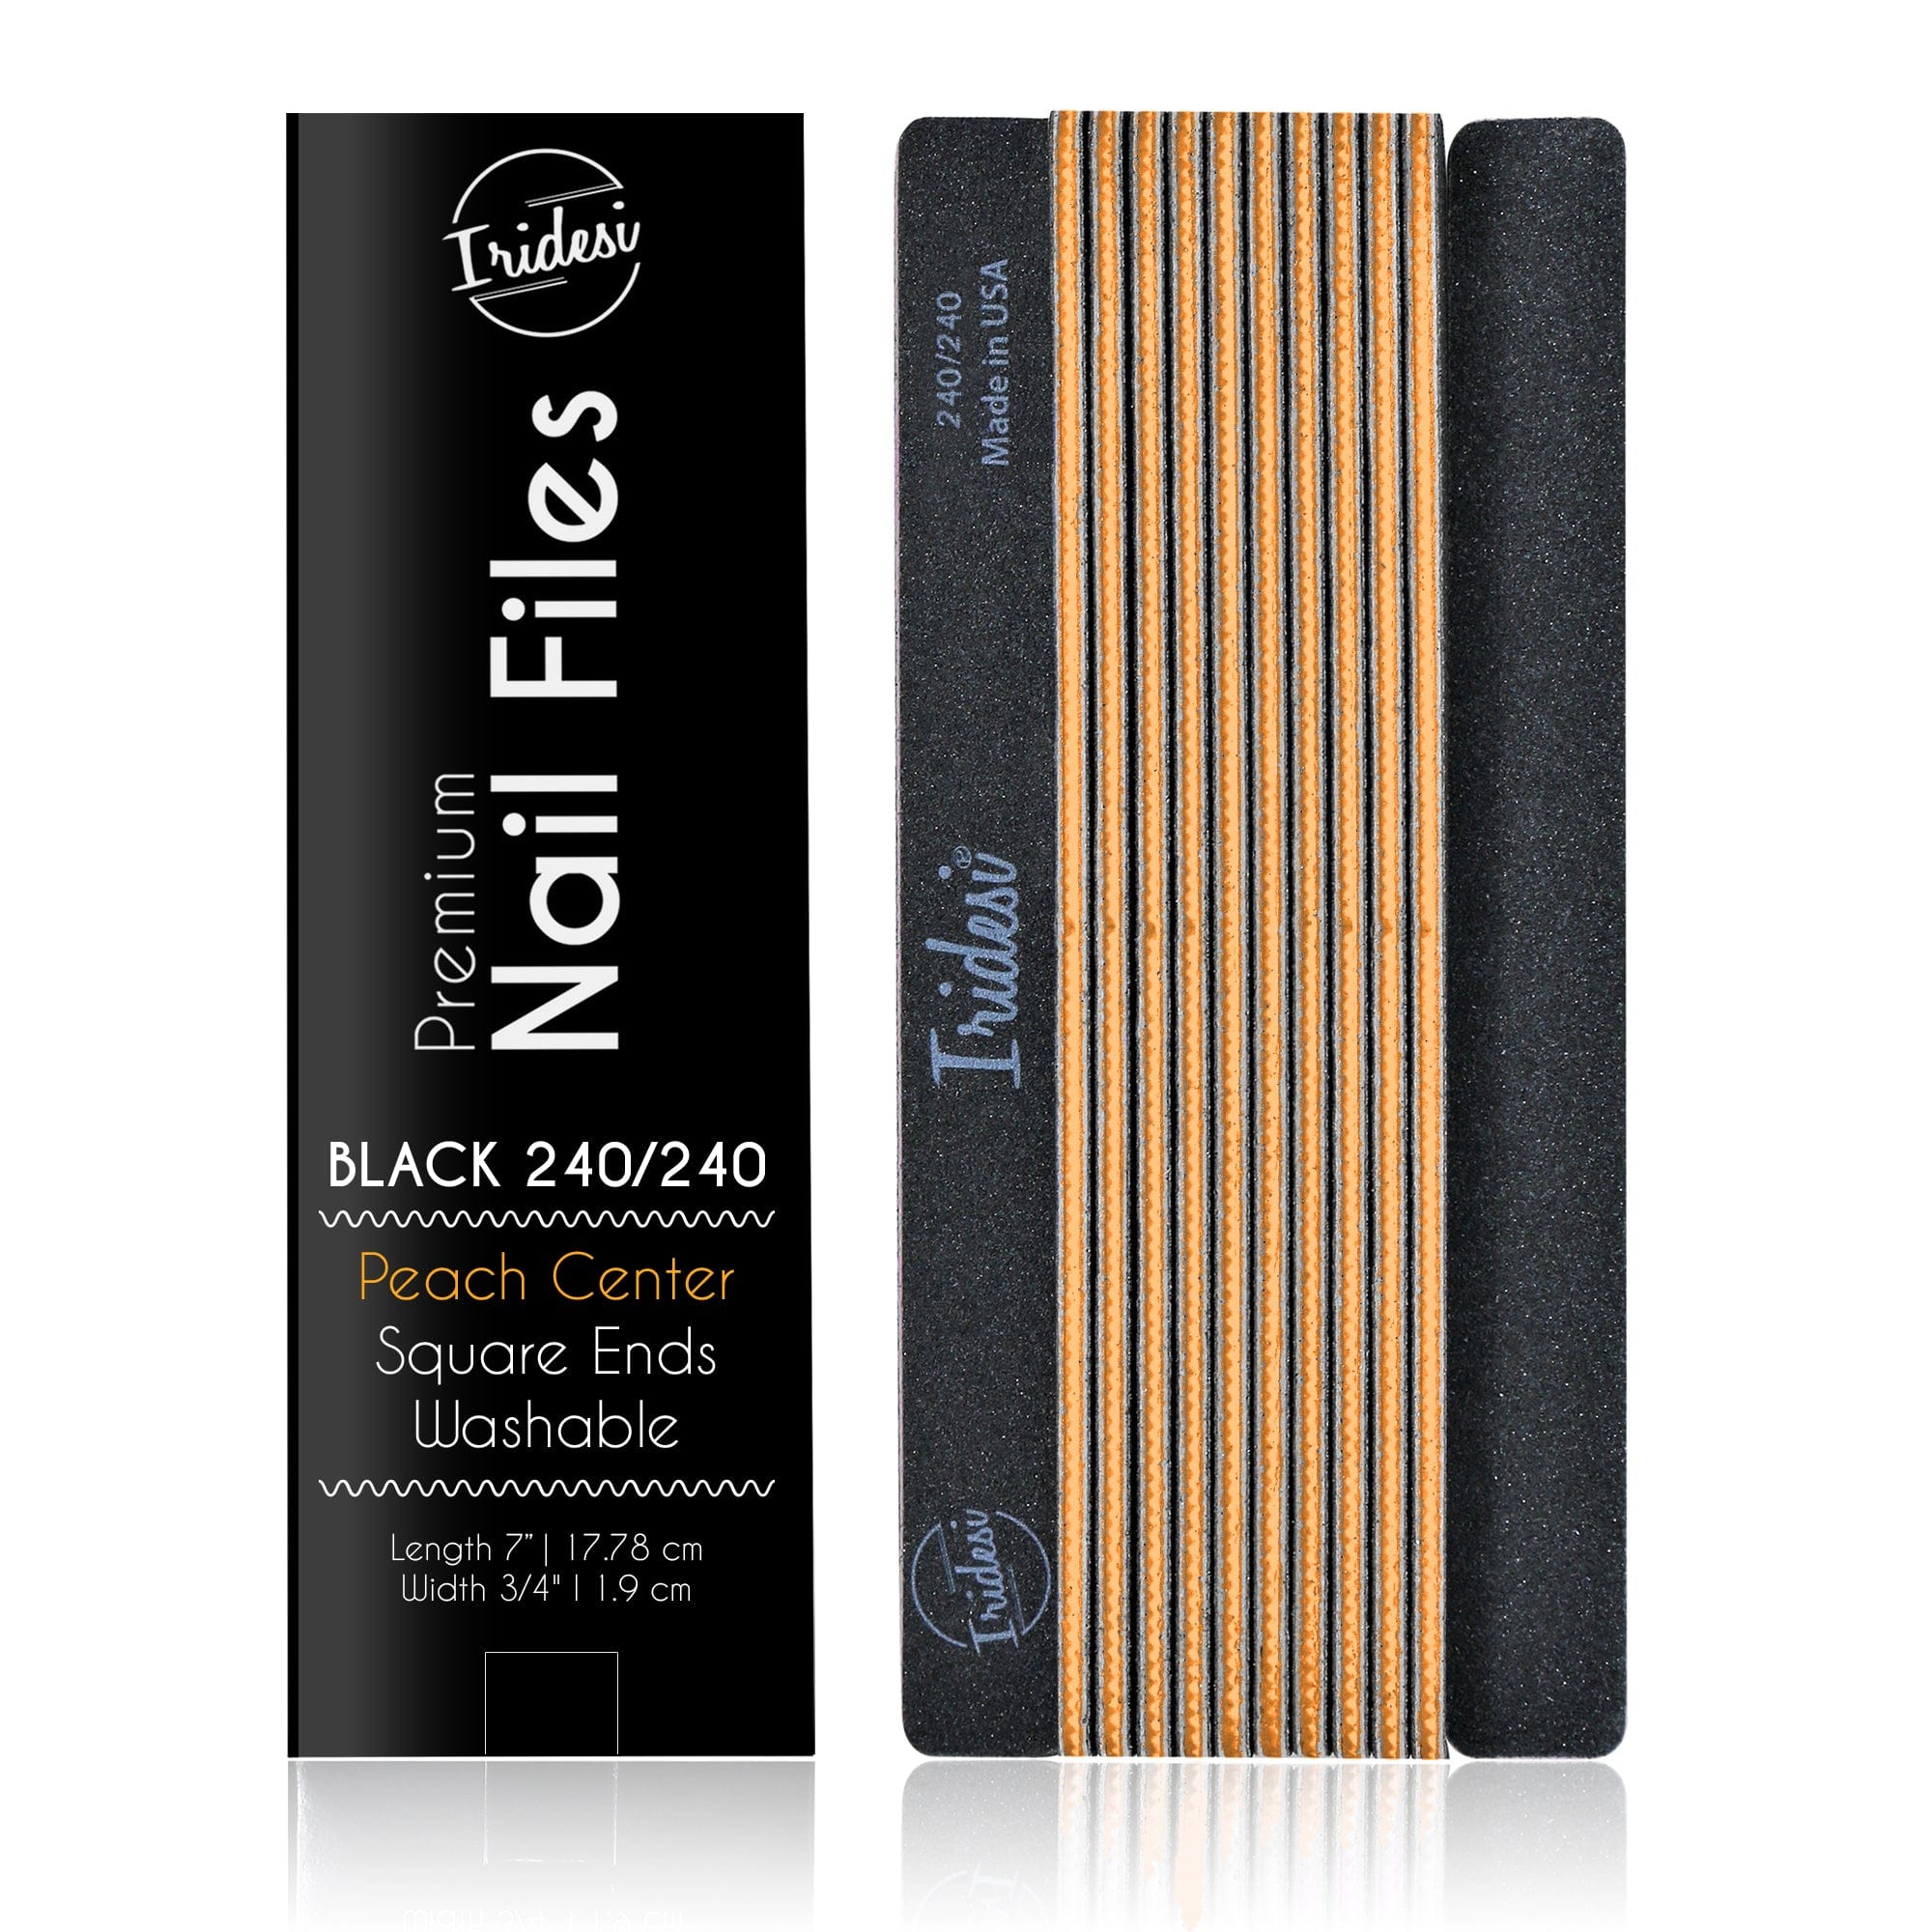 Professional Nail Files, Black Grit, Color Coded Center, Washable, Serrated Edges, 12 Packs